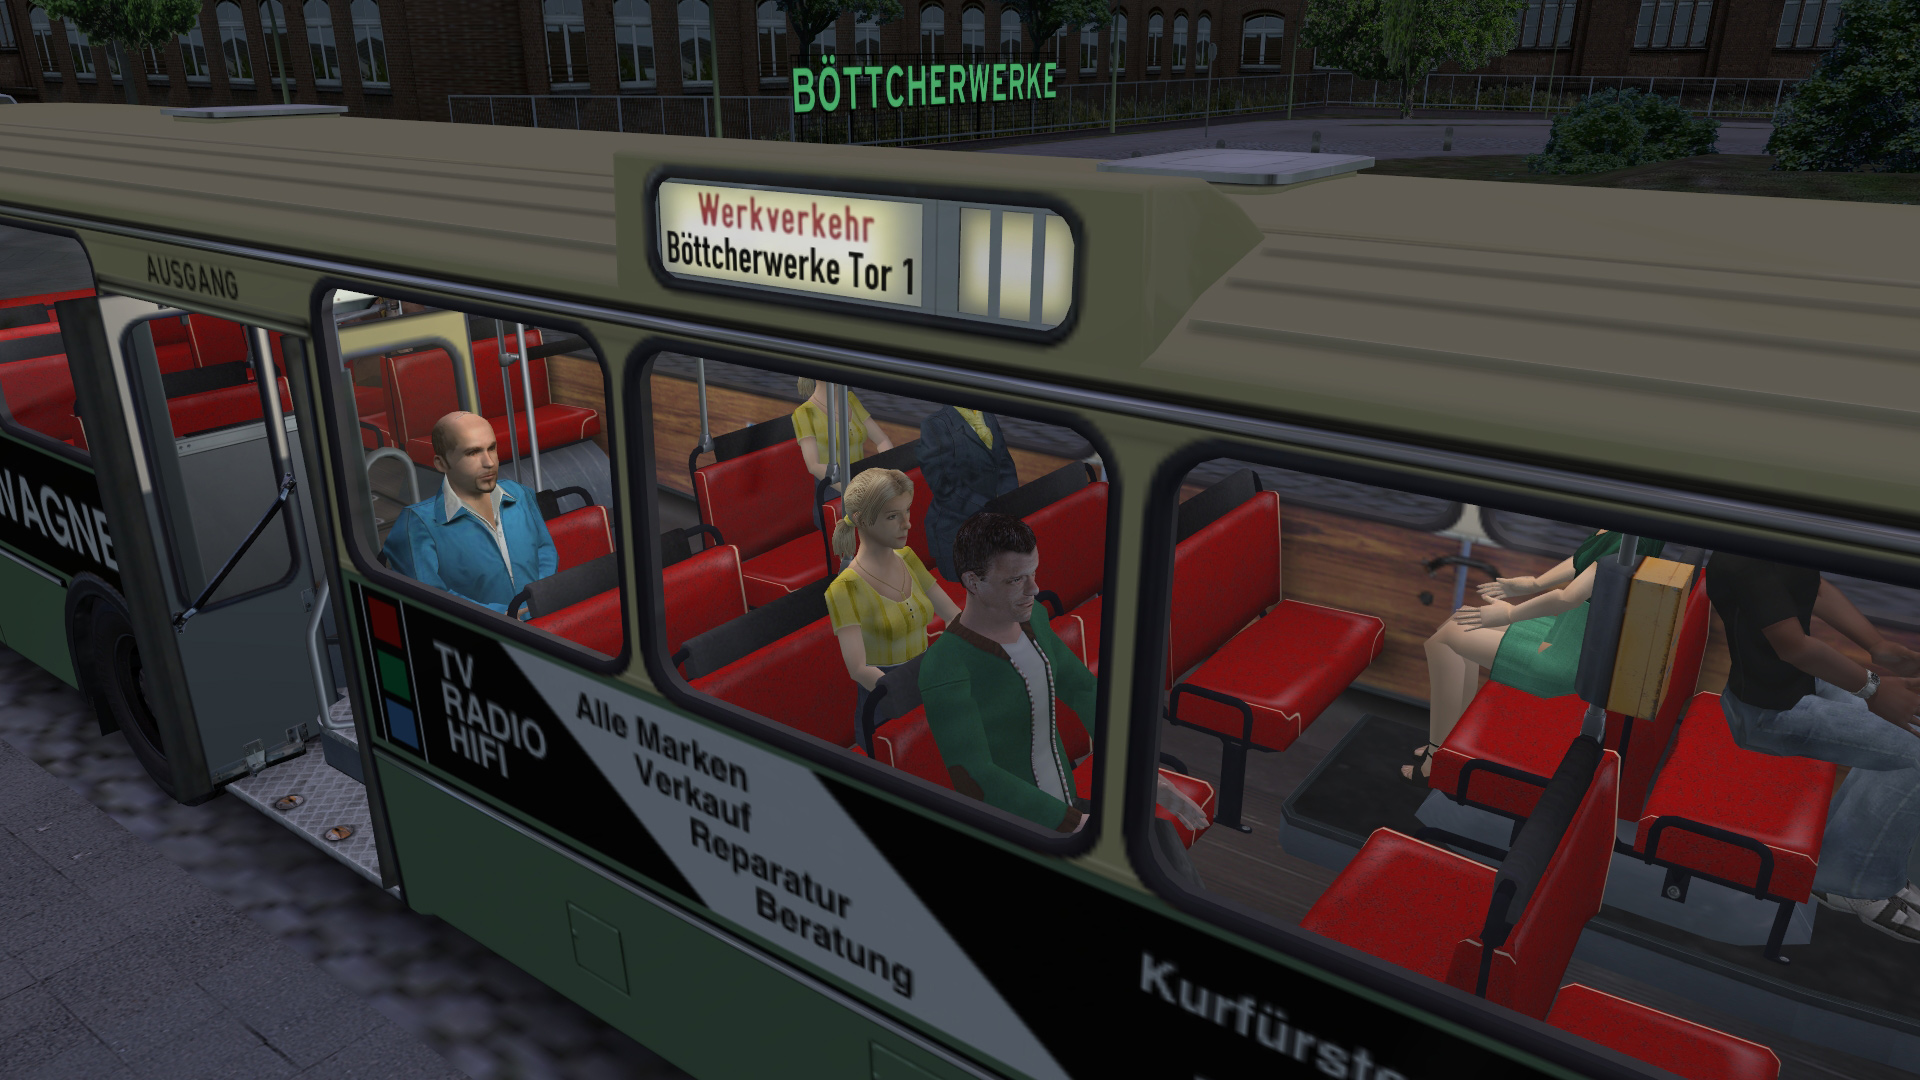 omsi 2 ai buses are not showing the textures